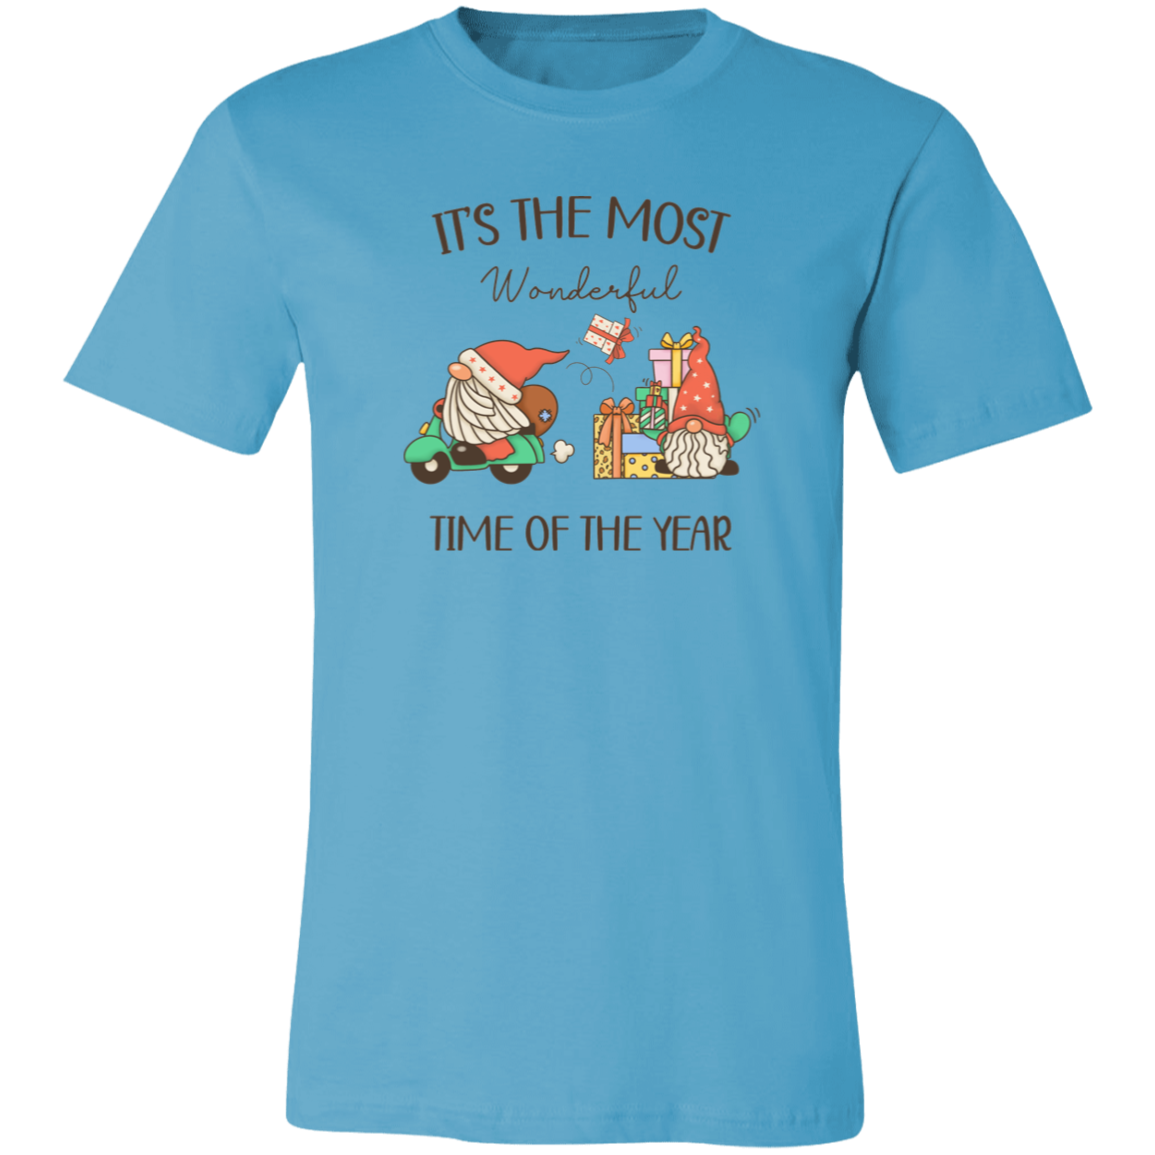 The Most Wonderful Time Of The Year Shirt